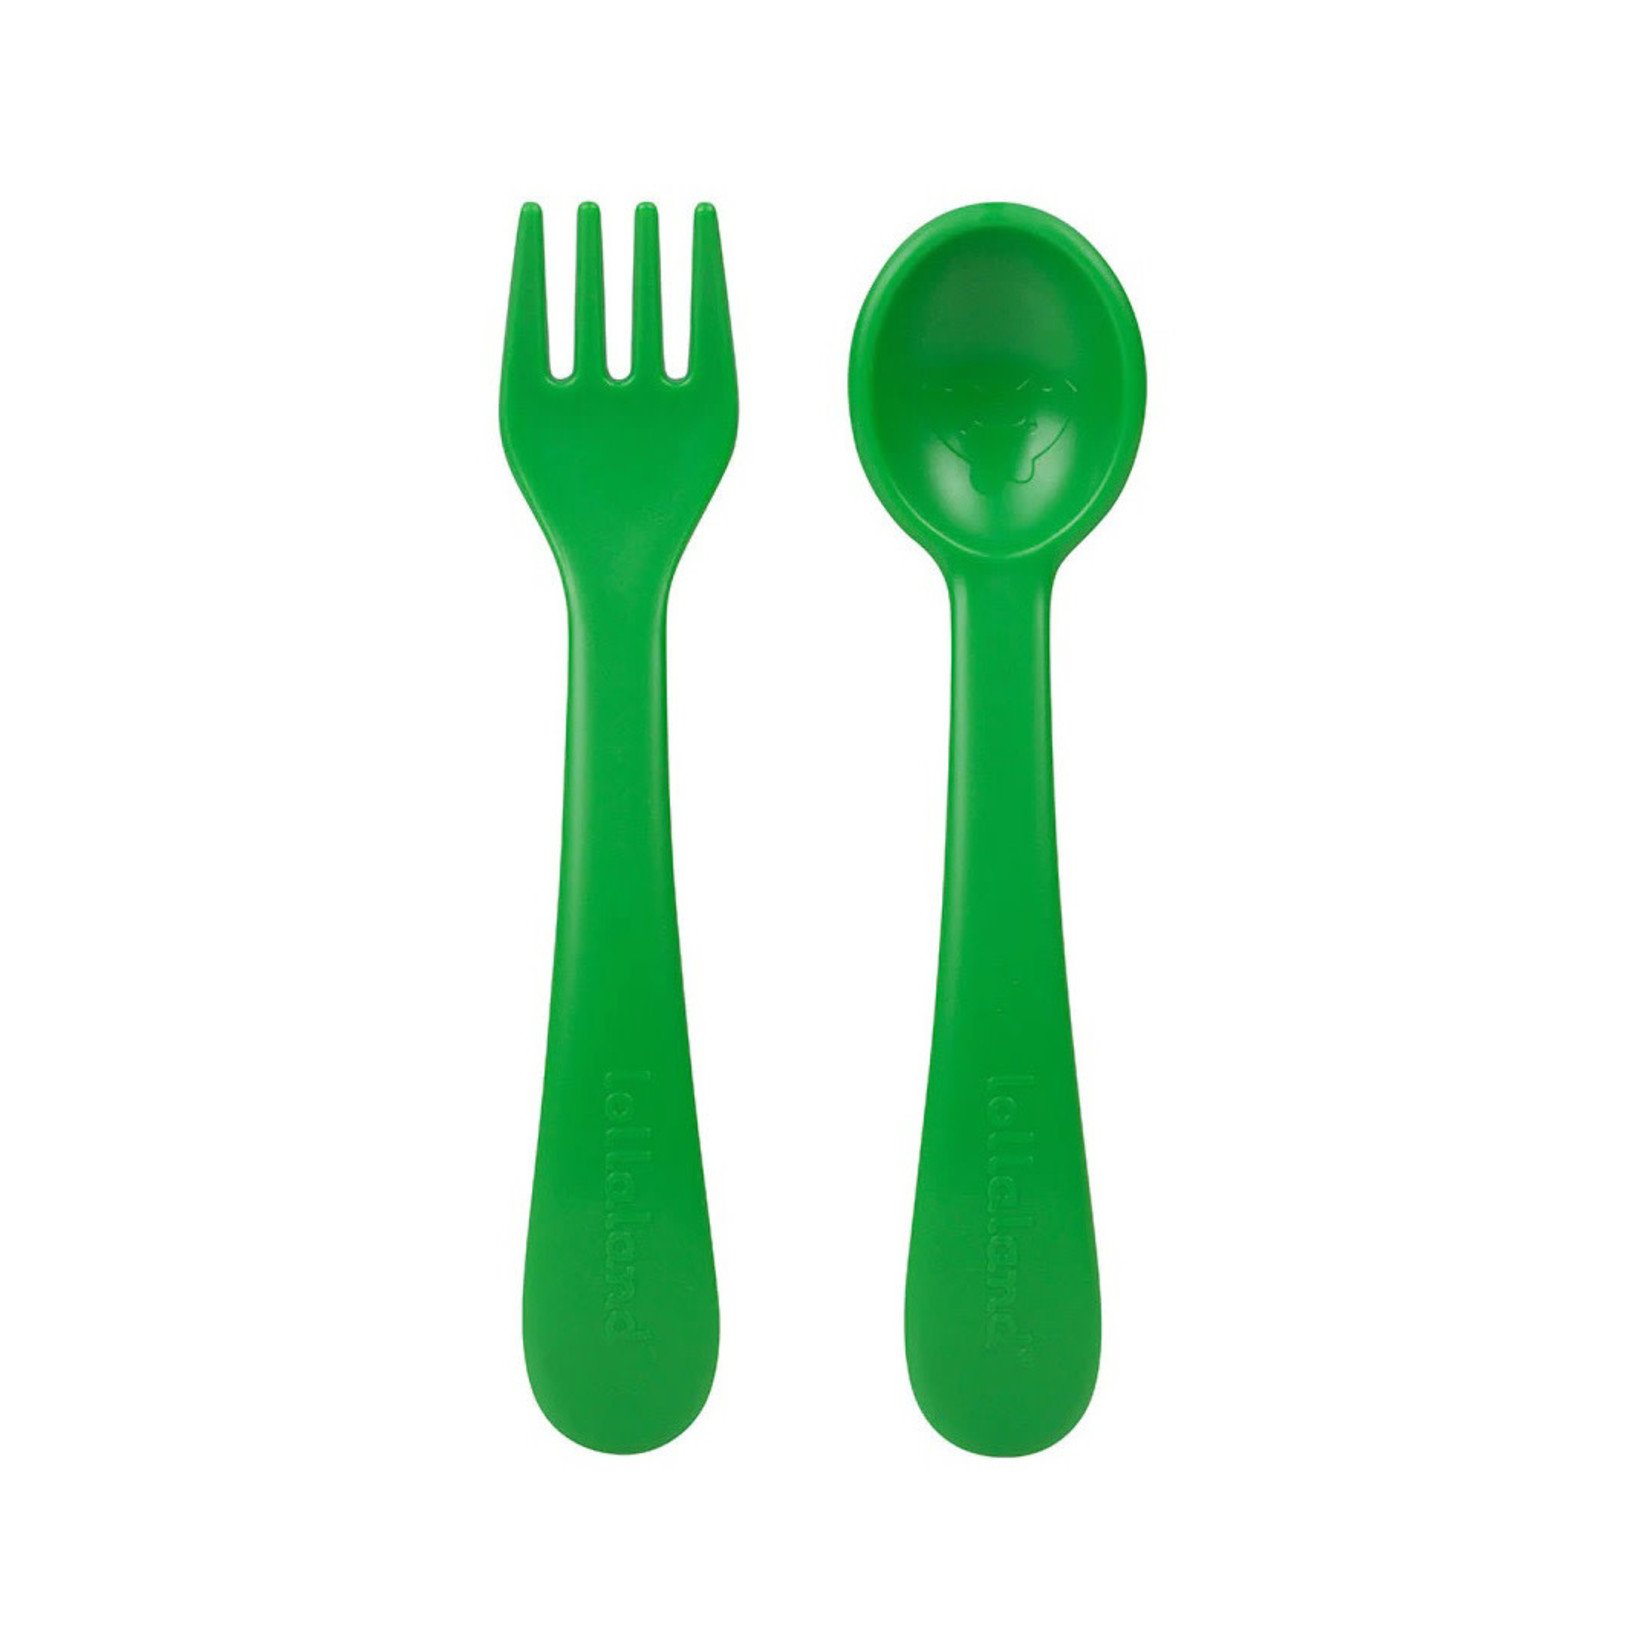 Utensil set - 2 spoon /2 fork/ travel pouch - GREEN - The Fancy Frog  Boutique